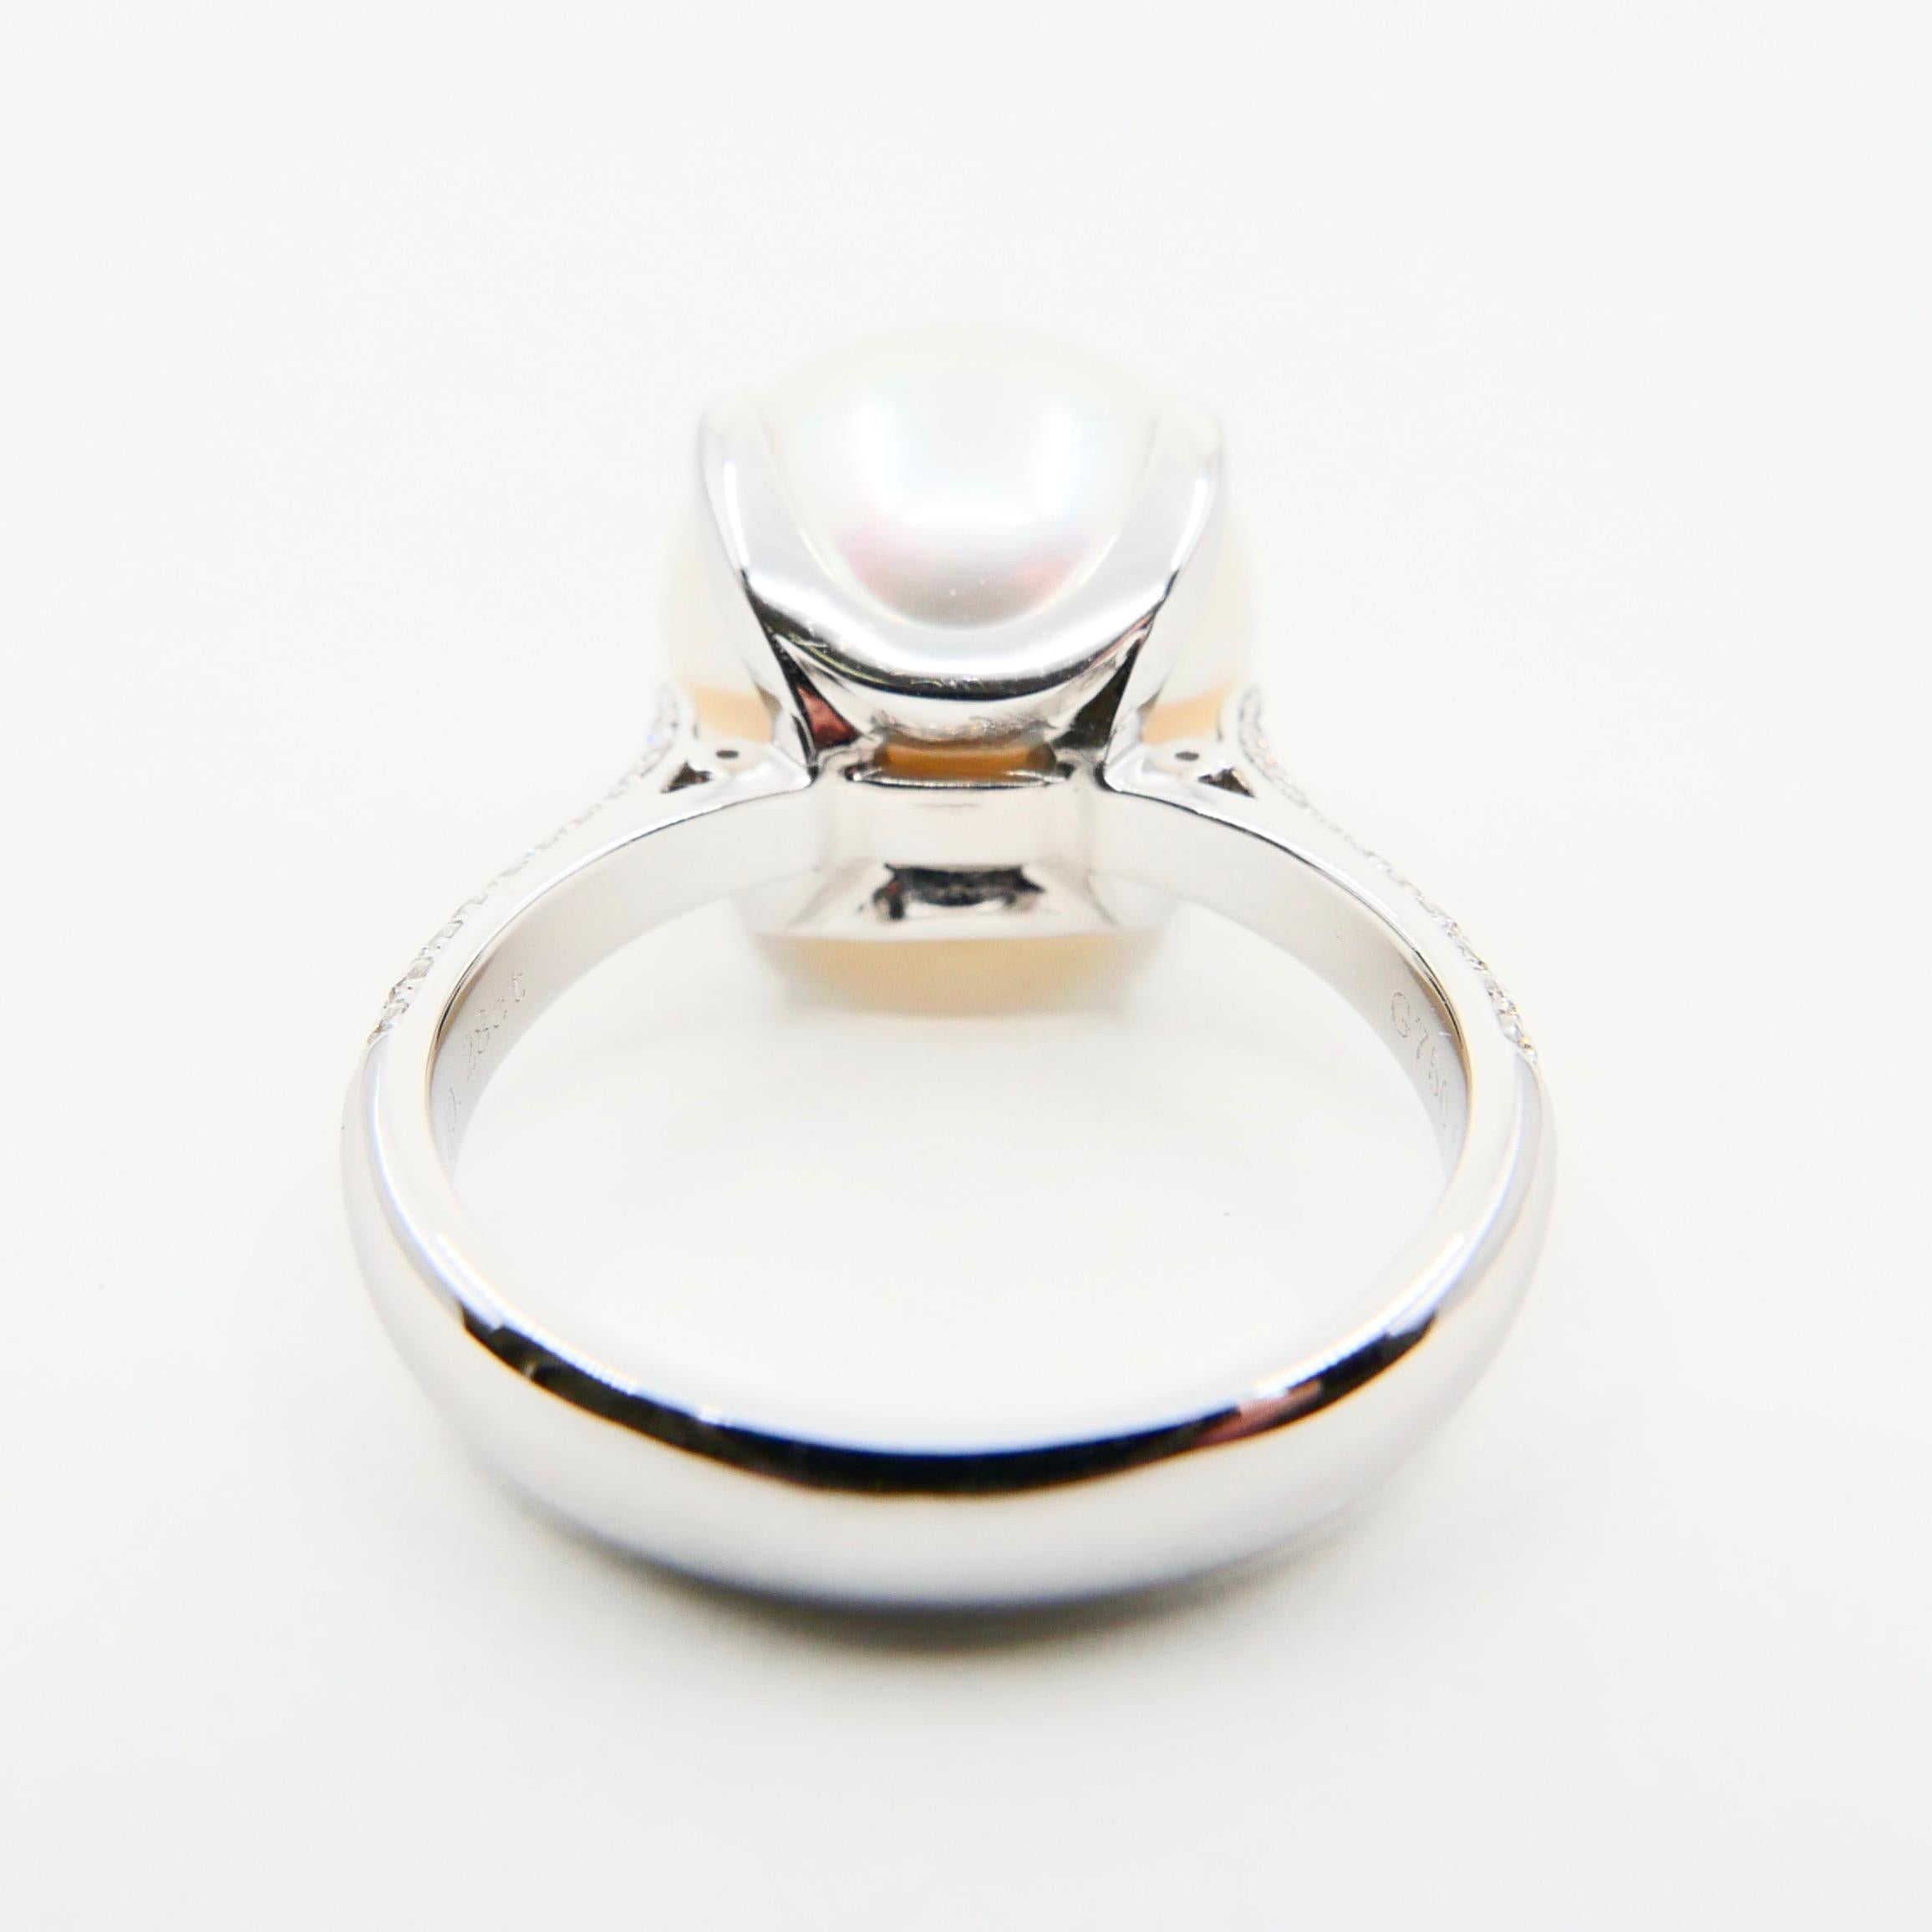 Certified South Sea Pearl and Diamond Ring, Our Signature Design 1